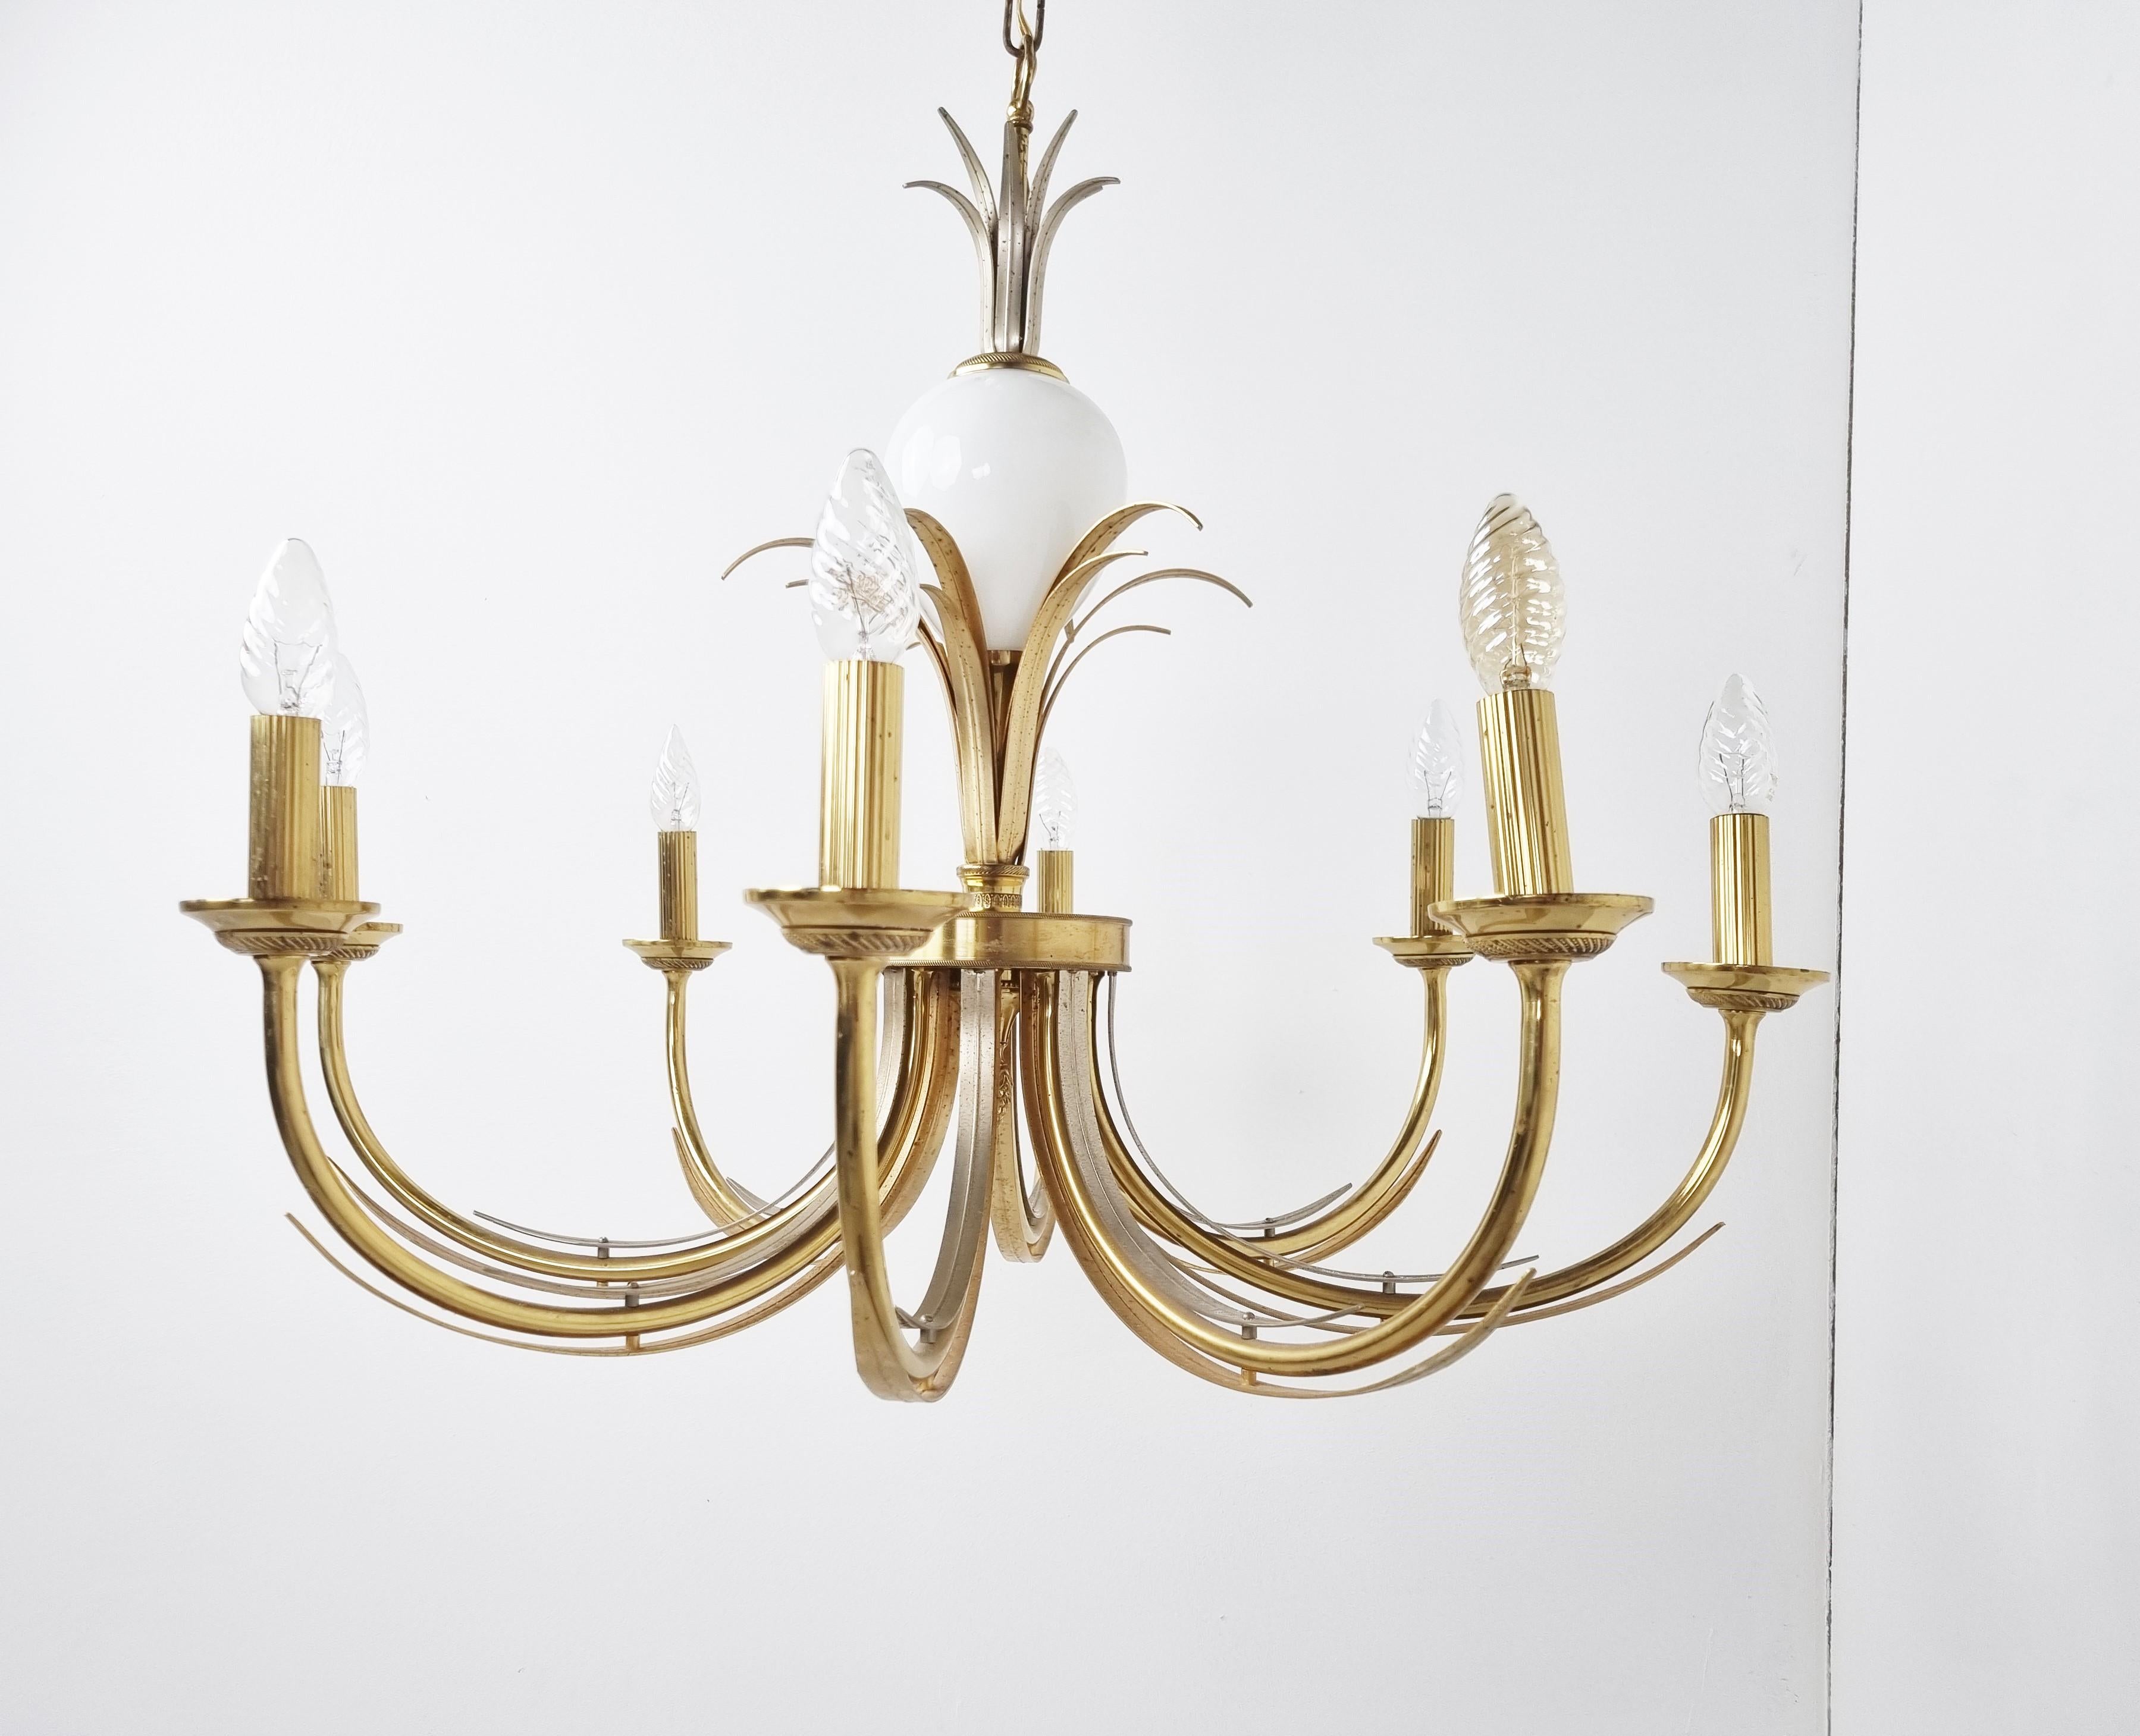 Brass and Chrome Pineapple Chandelier, 1970s For Sale 5